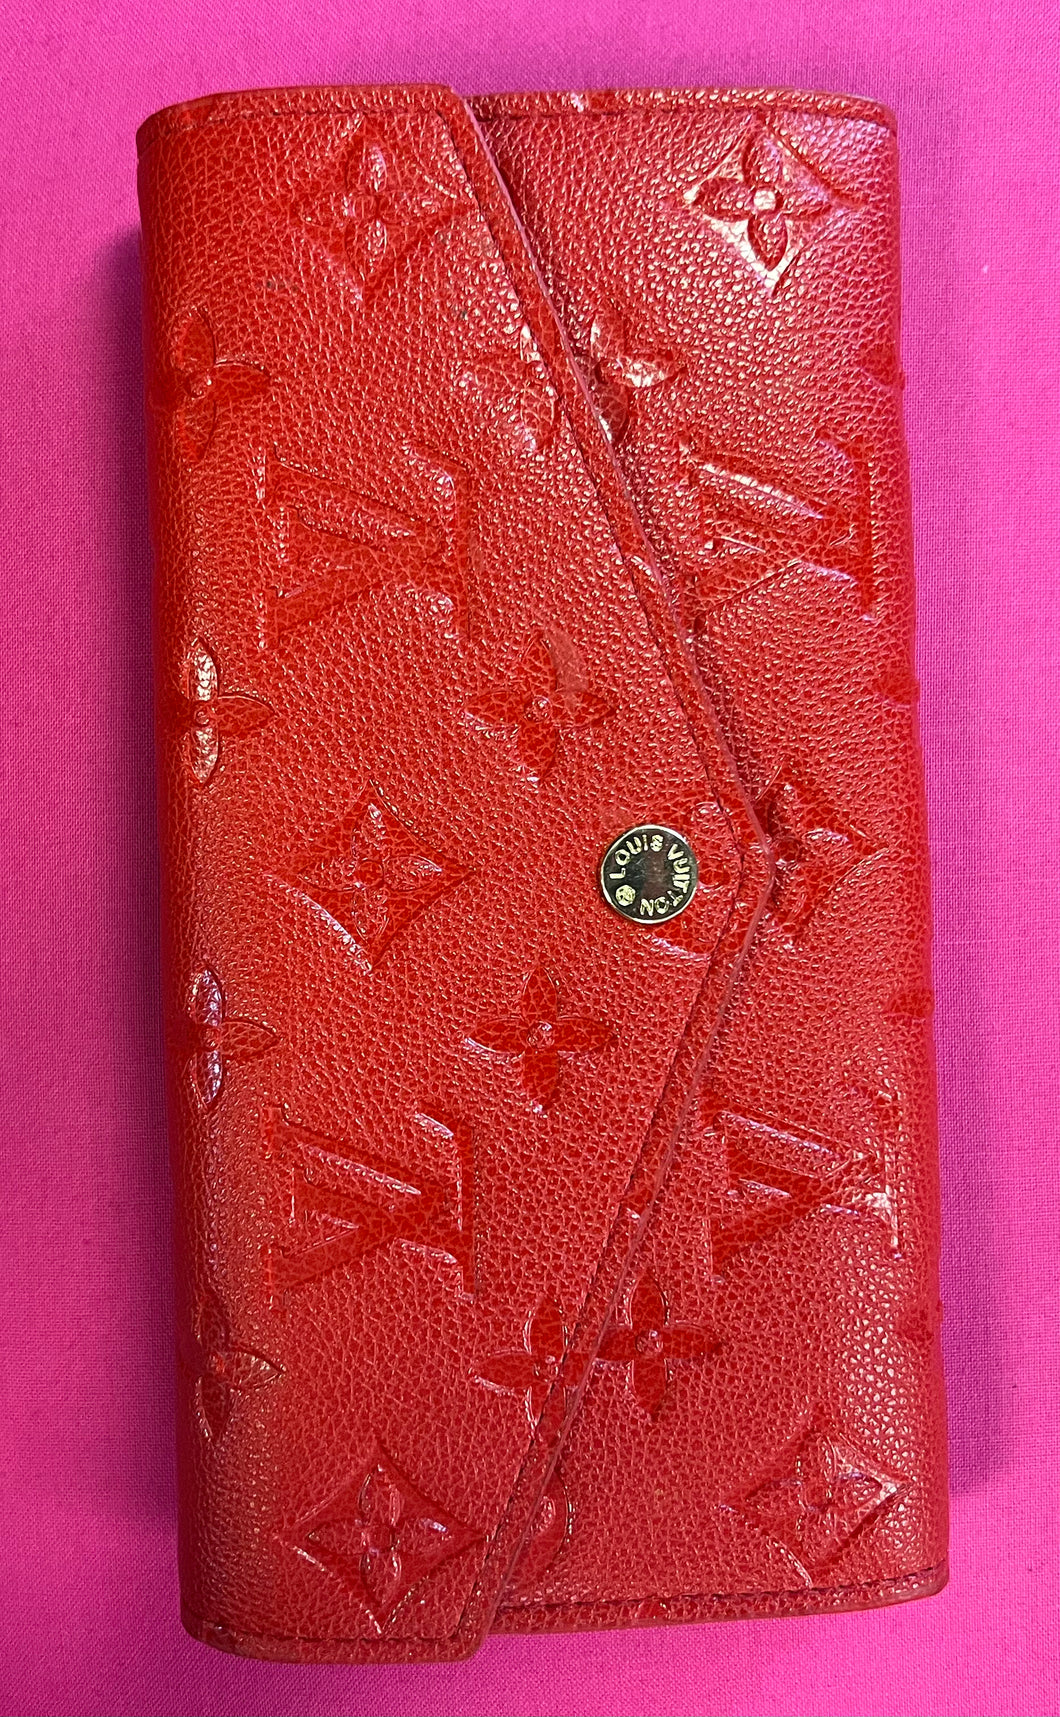 Fashion Red wallet checkbook card slots - Sassy Shelby's